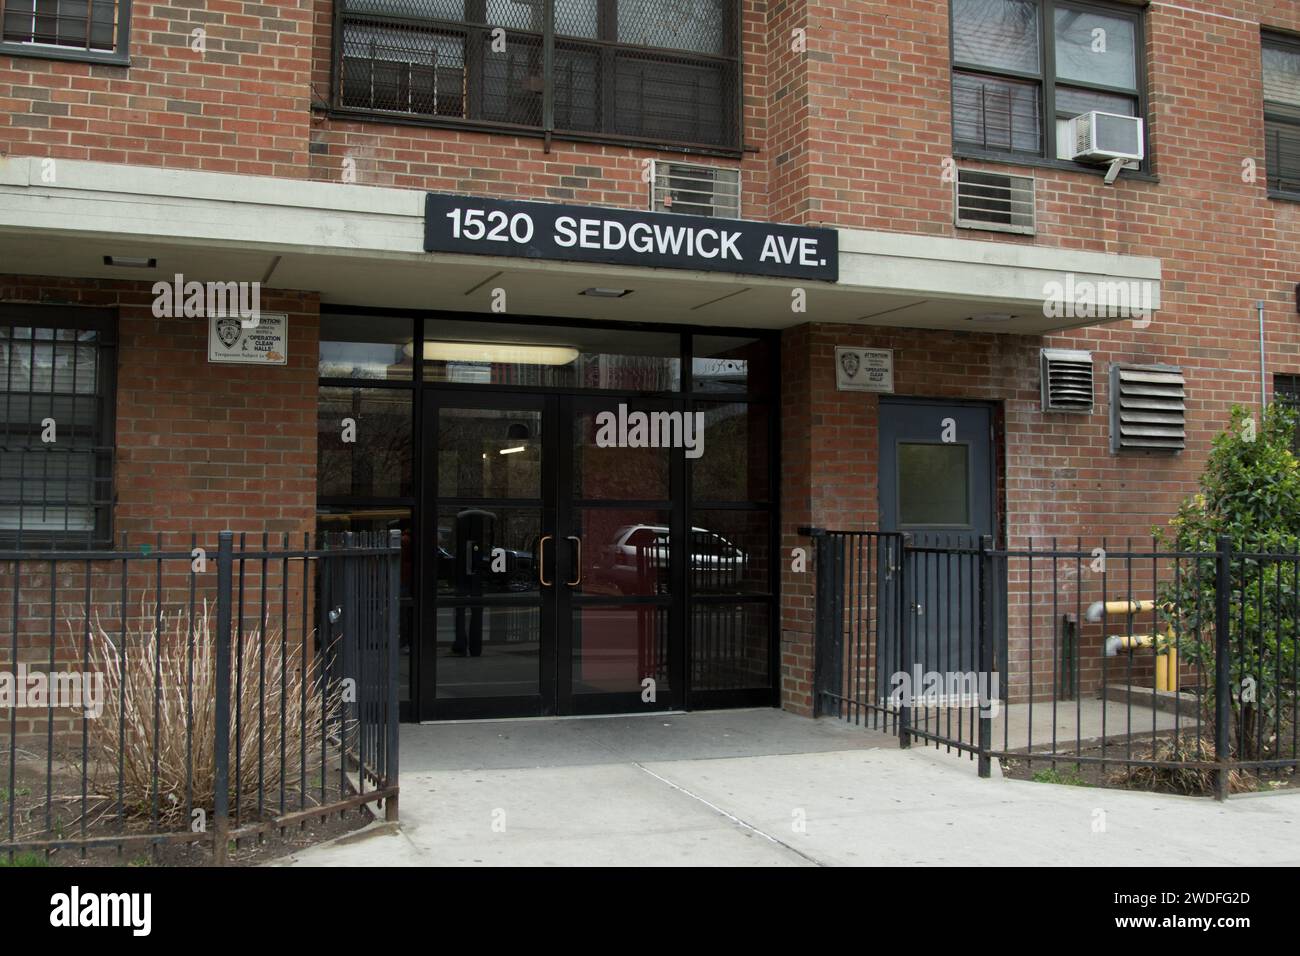 1520 Sedgwick Avenue, The Bronx, New York.  The birthplace of Hip Hop where DJ Kool Herc spun his records and gave birth to the music genre Stock Photo